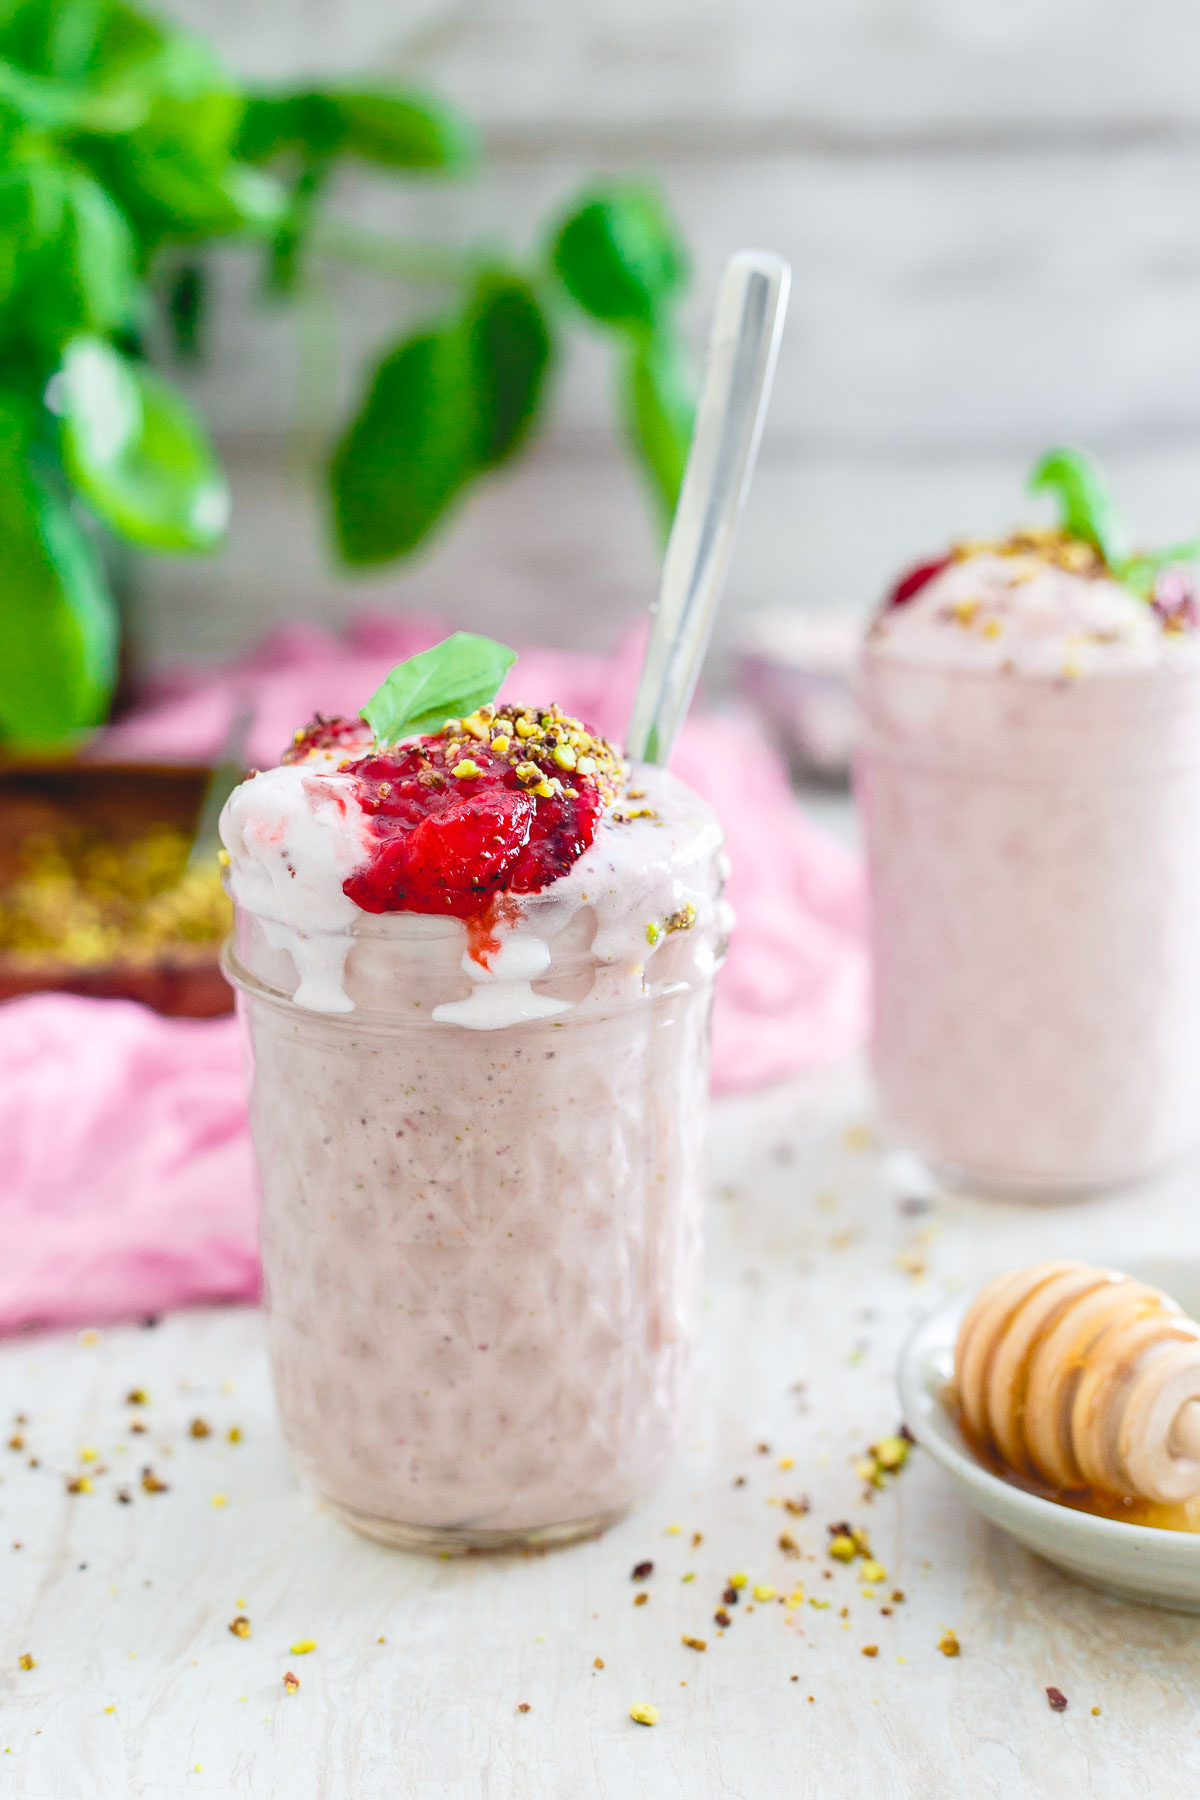 Creamy, sweet with a punch of freshness from the basil, this roasted strawberry milkshake is a delicious and healthy way to indulge!